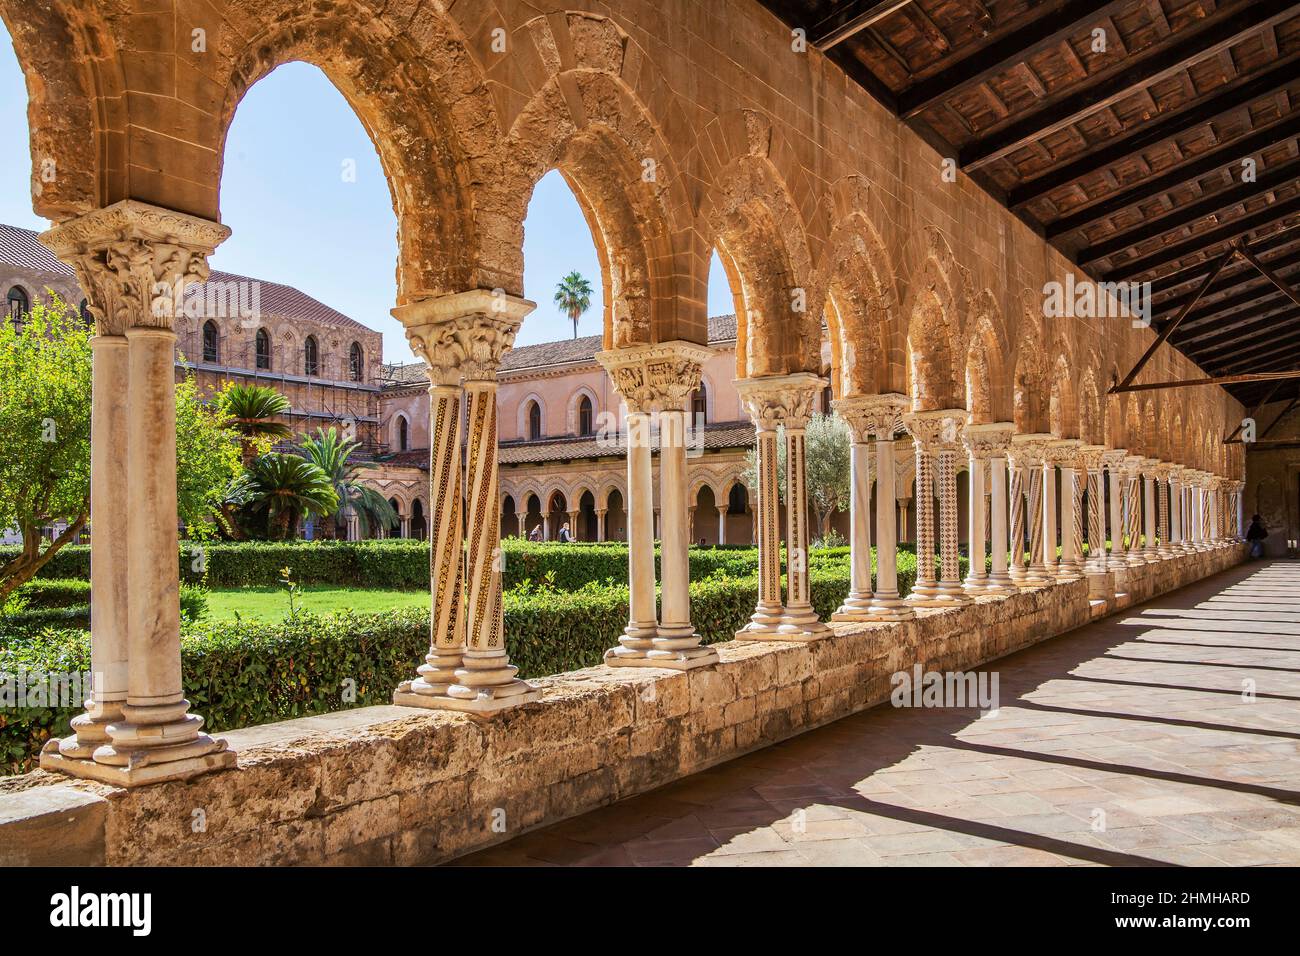 Cloister with garden of the Benedettino monastery at the cathedral, Monreale, Sicily, Italy Stock Photo